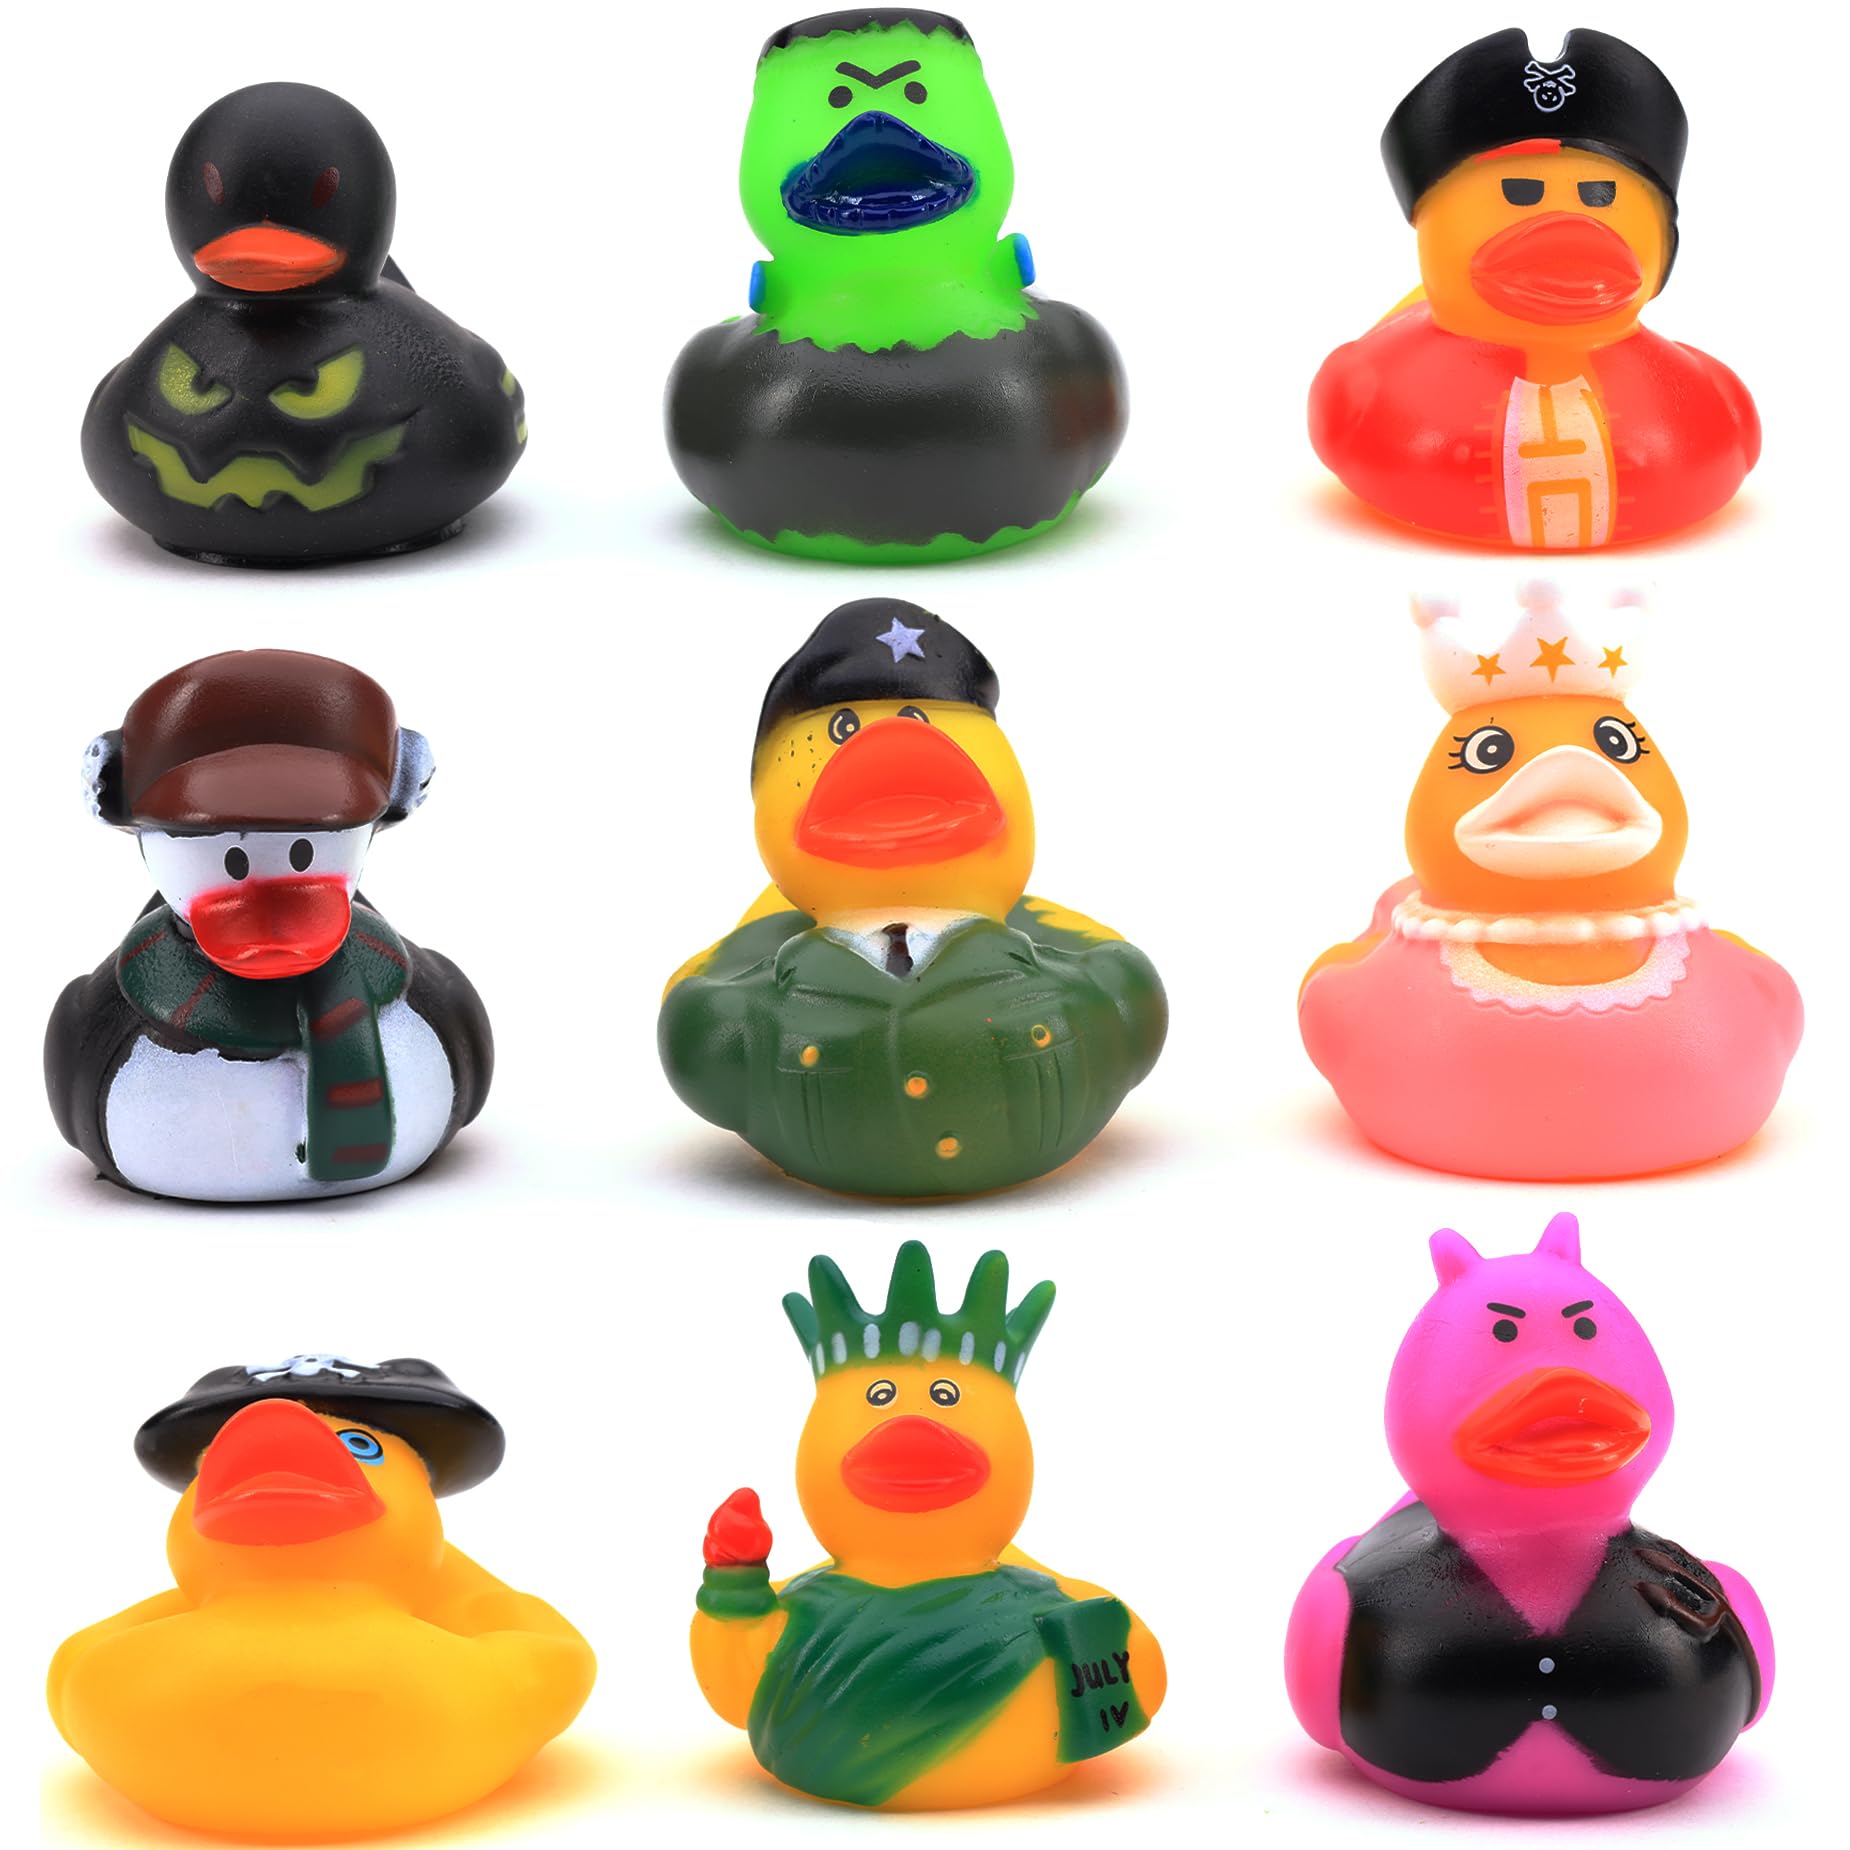 Rubber Duck Toy for Ducking - 100 Pcs Ducky Playset Bath Toys - Rubber Duckies for Beach Pool - Goody Bag Stuffers Classroom Prizes - Bulk Toys